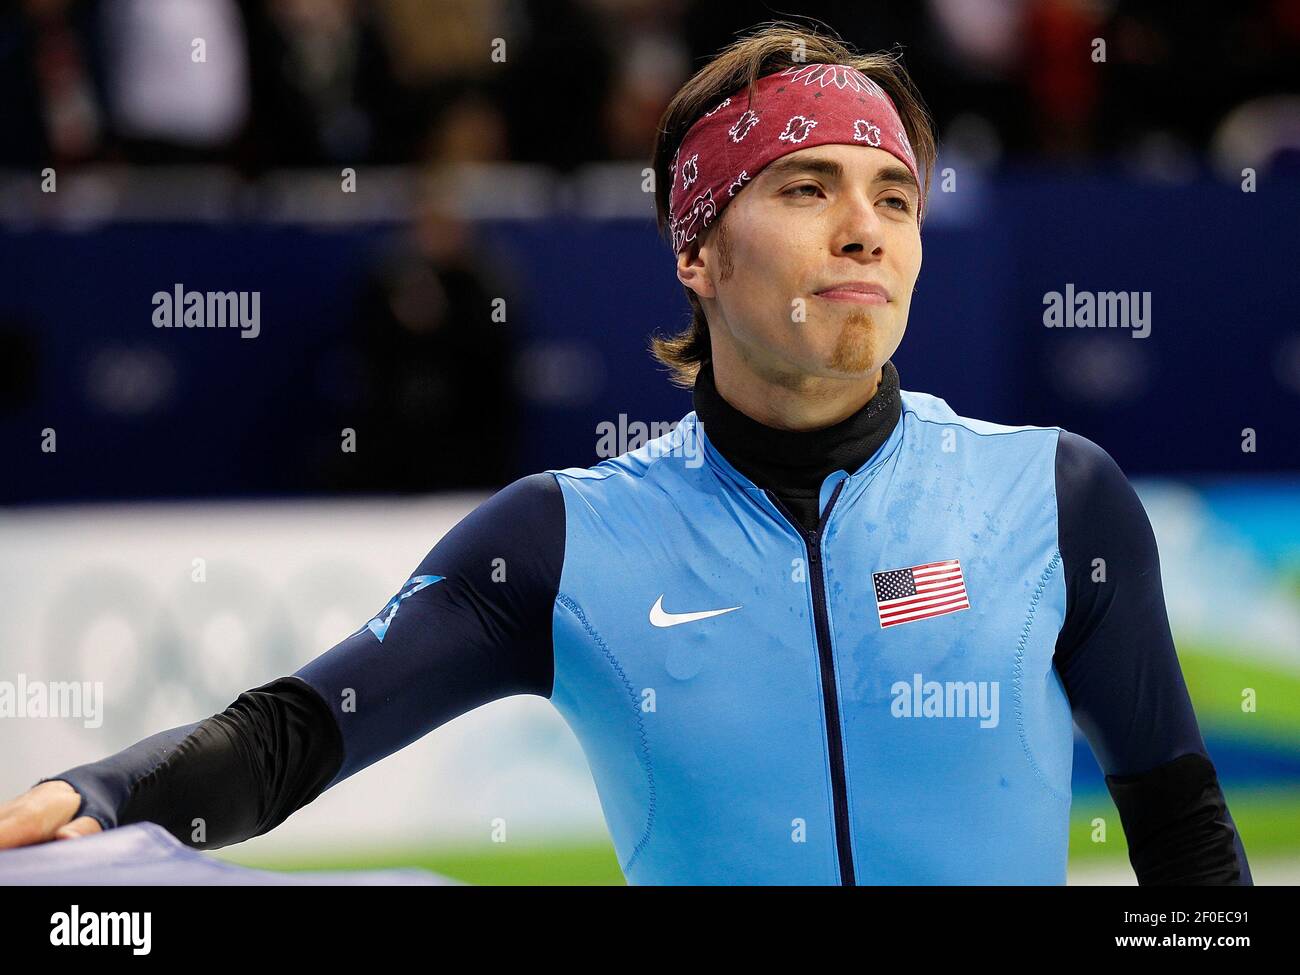 USA's Apolo Anton Ohno after skating in the men's 5,000-meter relay short track finals during the 2010 Winter Olympics in Vancouver, British Columbia, Friday, February 26, 2010. The United States finished in 3rd place to win a Bronze Medal. (Photo by Harry E. Walker/TNS/Sipa USA) Stock Photo